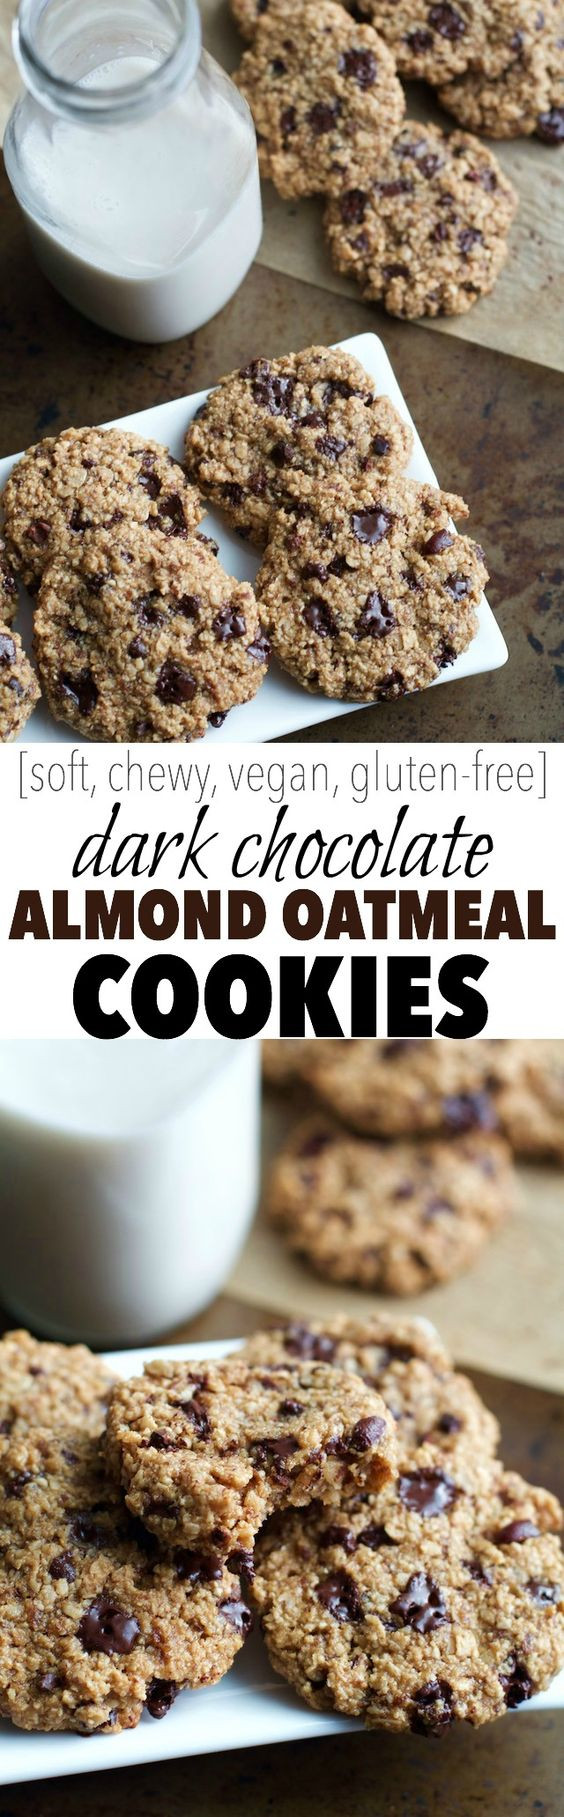 Oatmeal Cookies Without Flour
 Dark Chocolate Almond Oatmeal Cookies Recipe